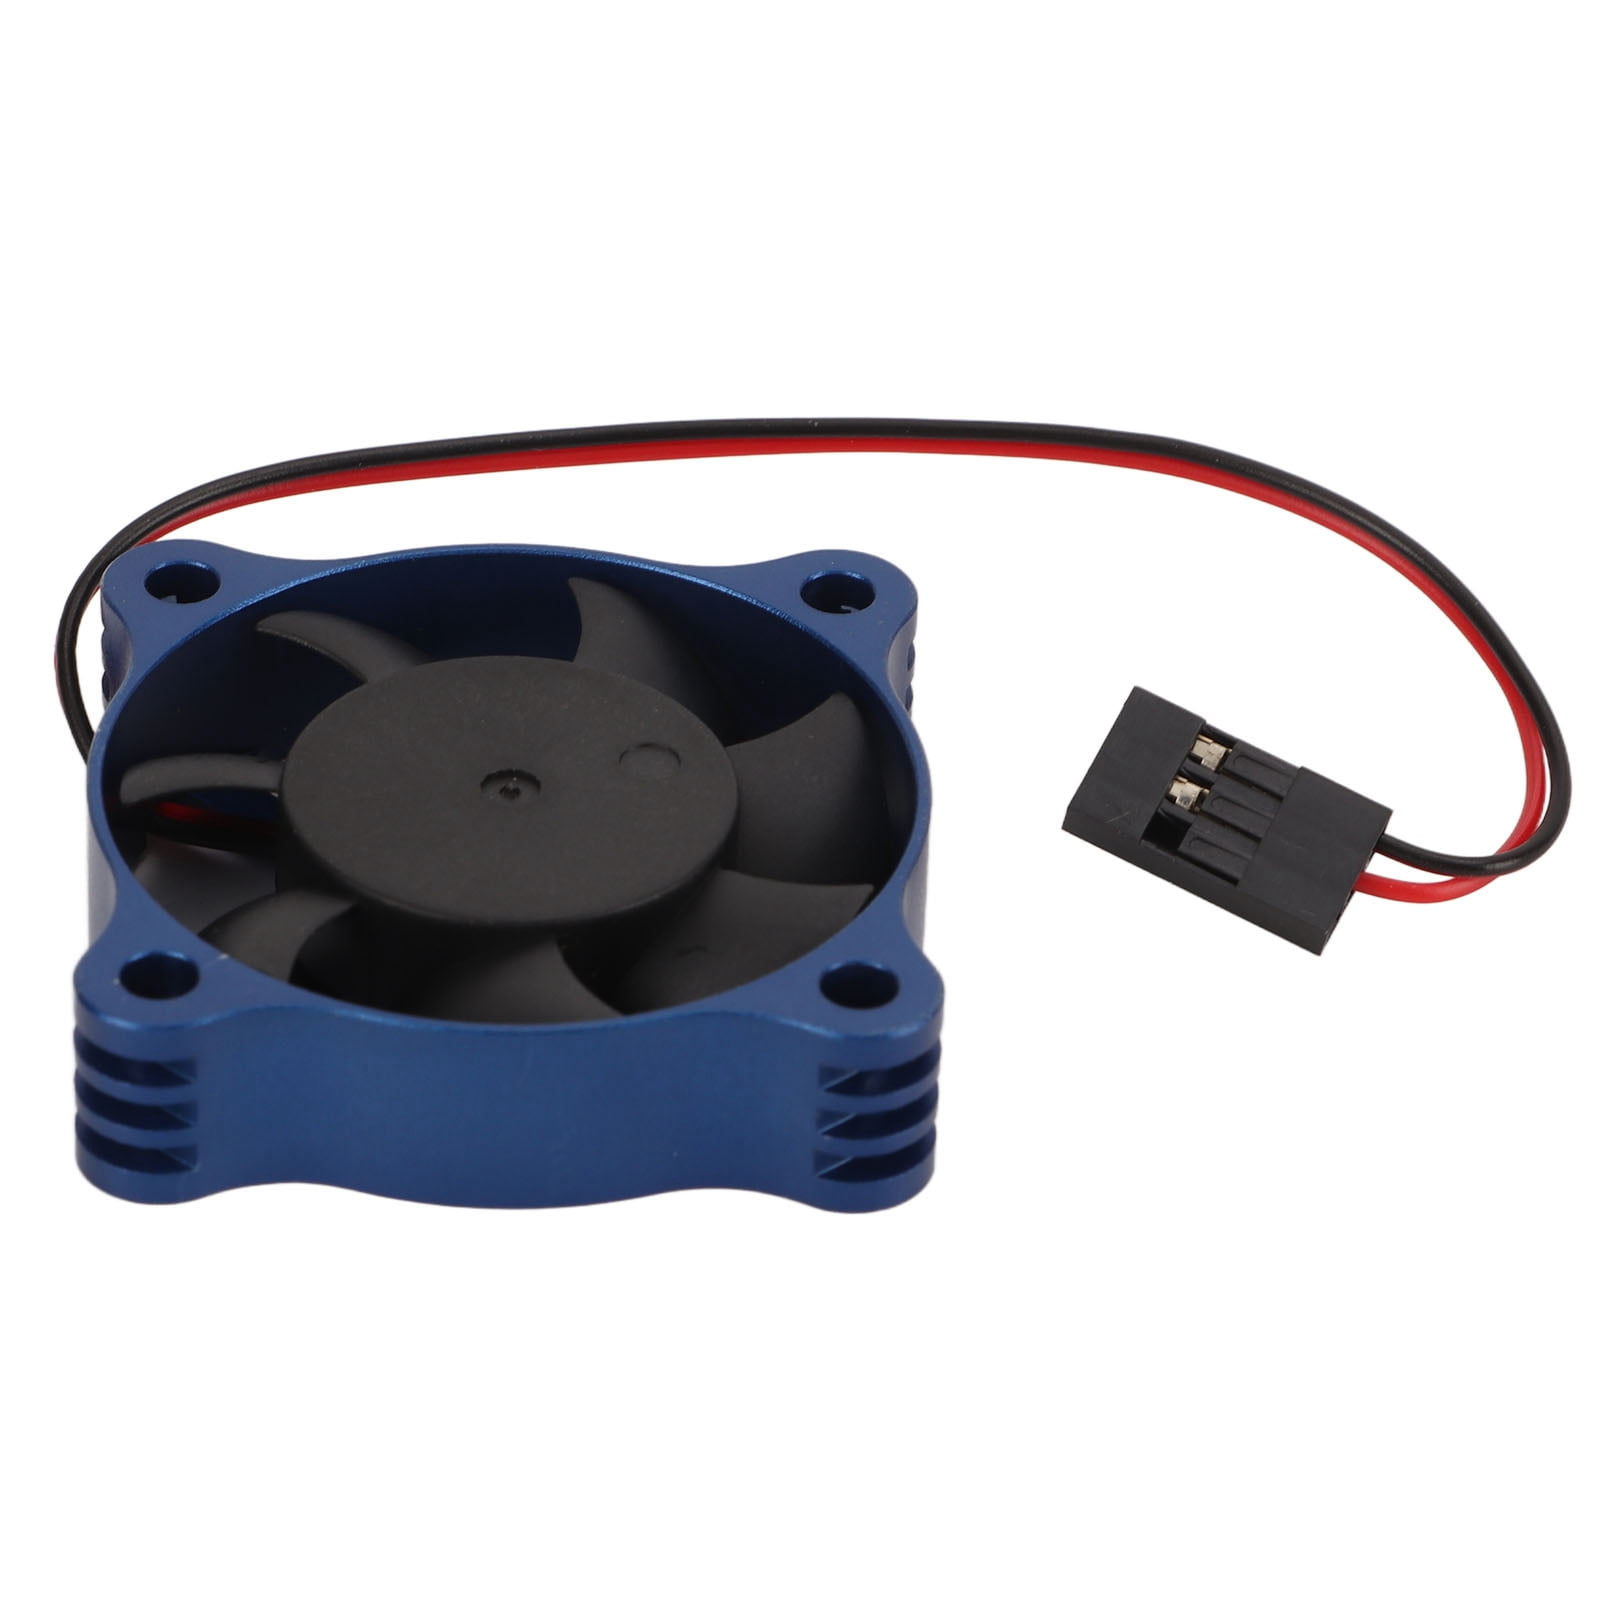 RC ESC Cooling Fan, Powerful Replacement Motor Cooling Fan Fast Dissipation Lightweight For 1/10 1/12 RC Car - Walmart.com